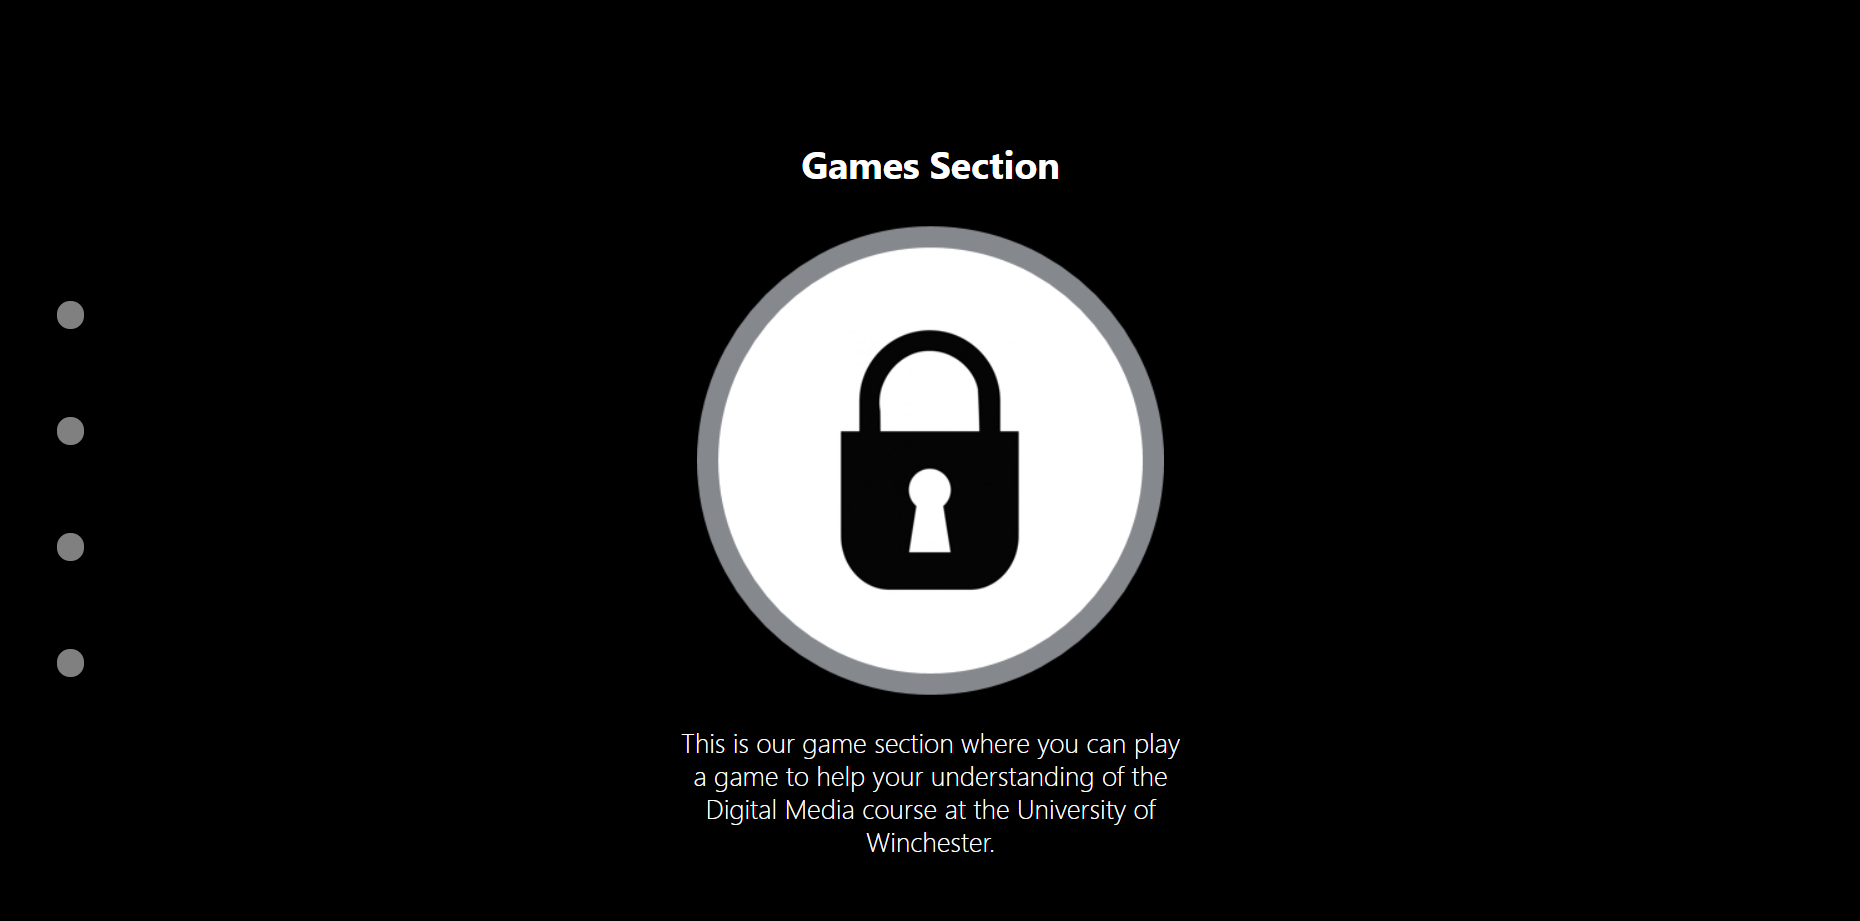 The Game Section of the Website